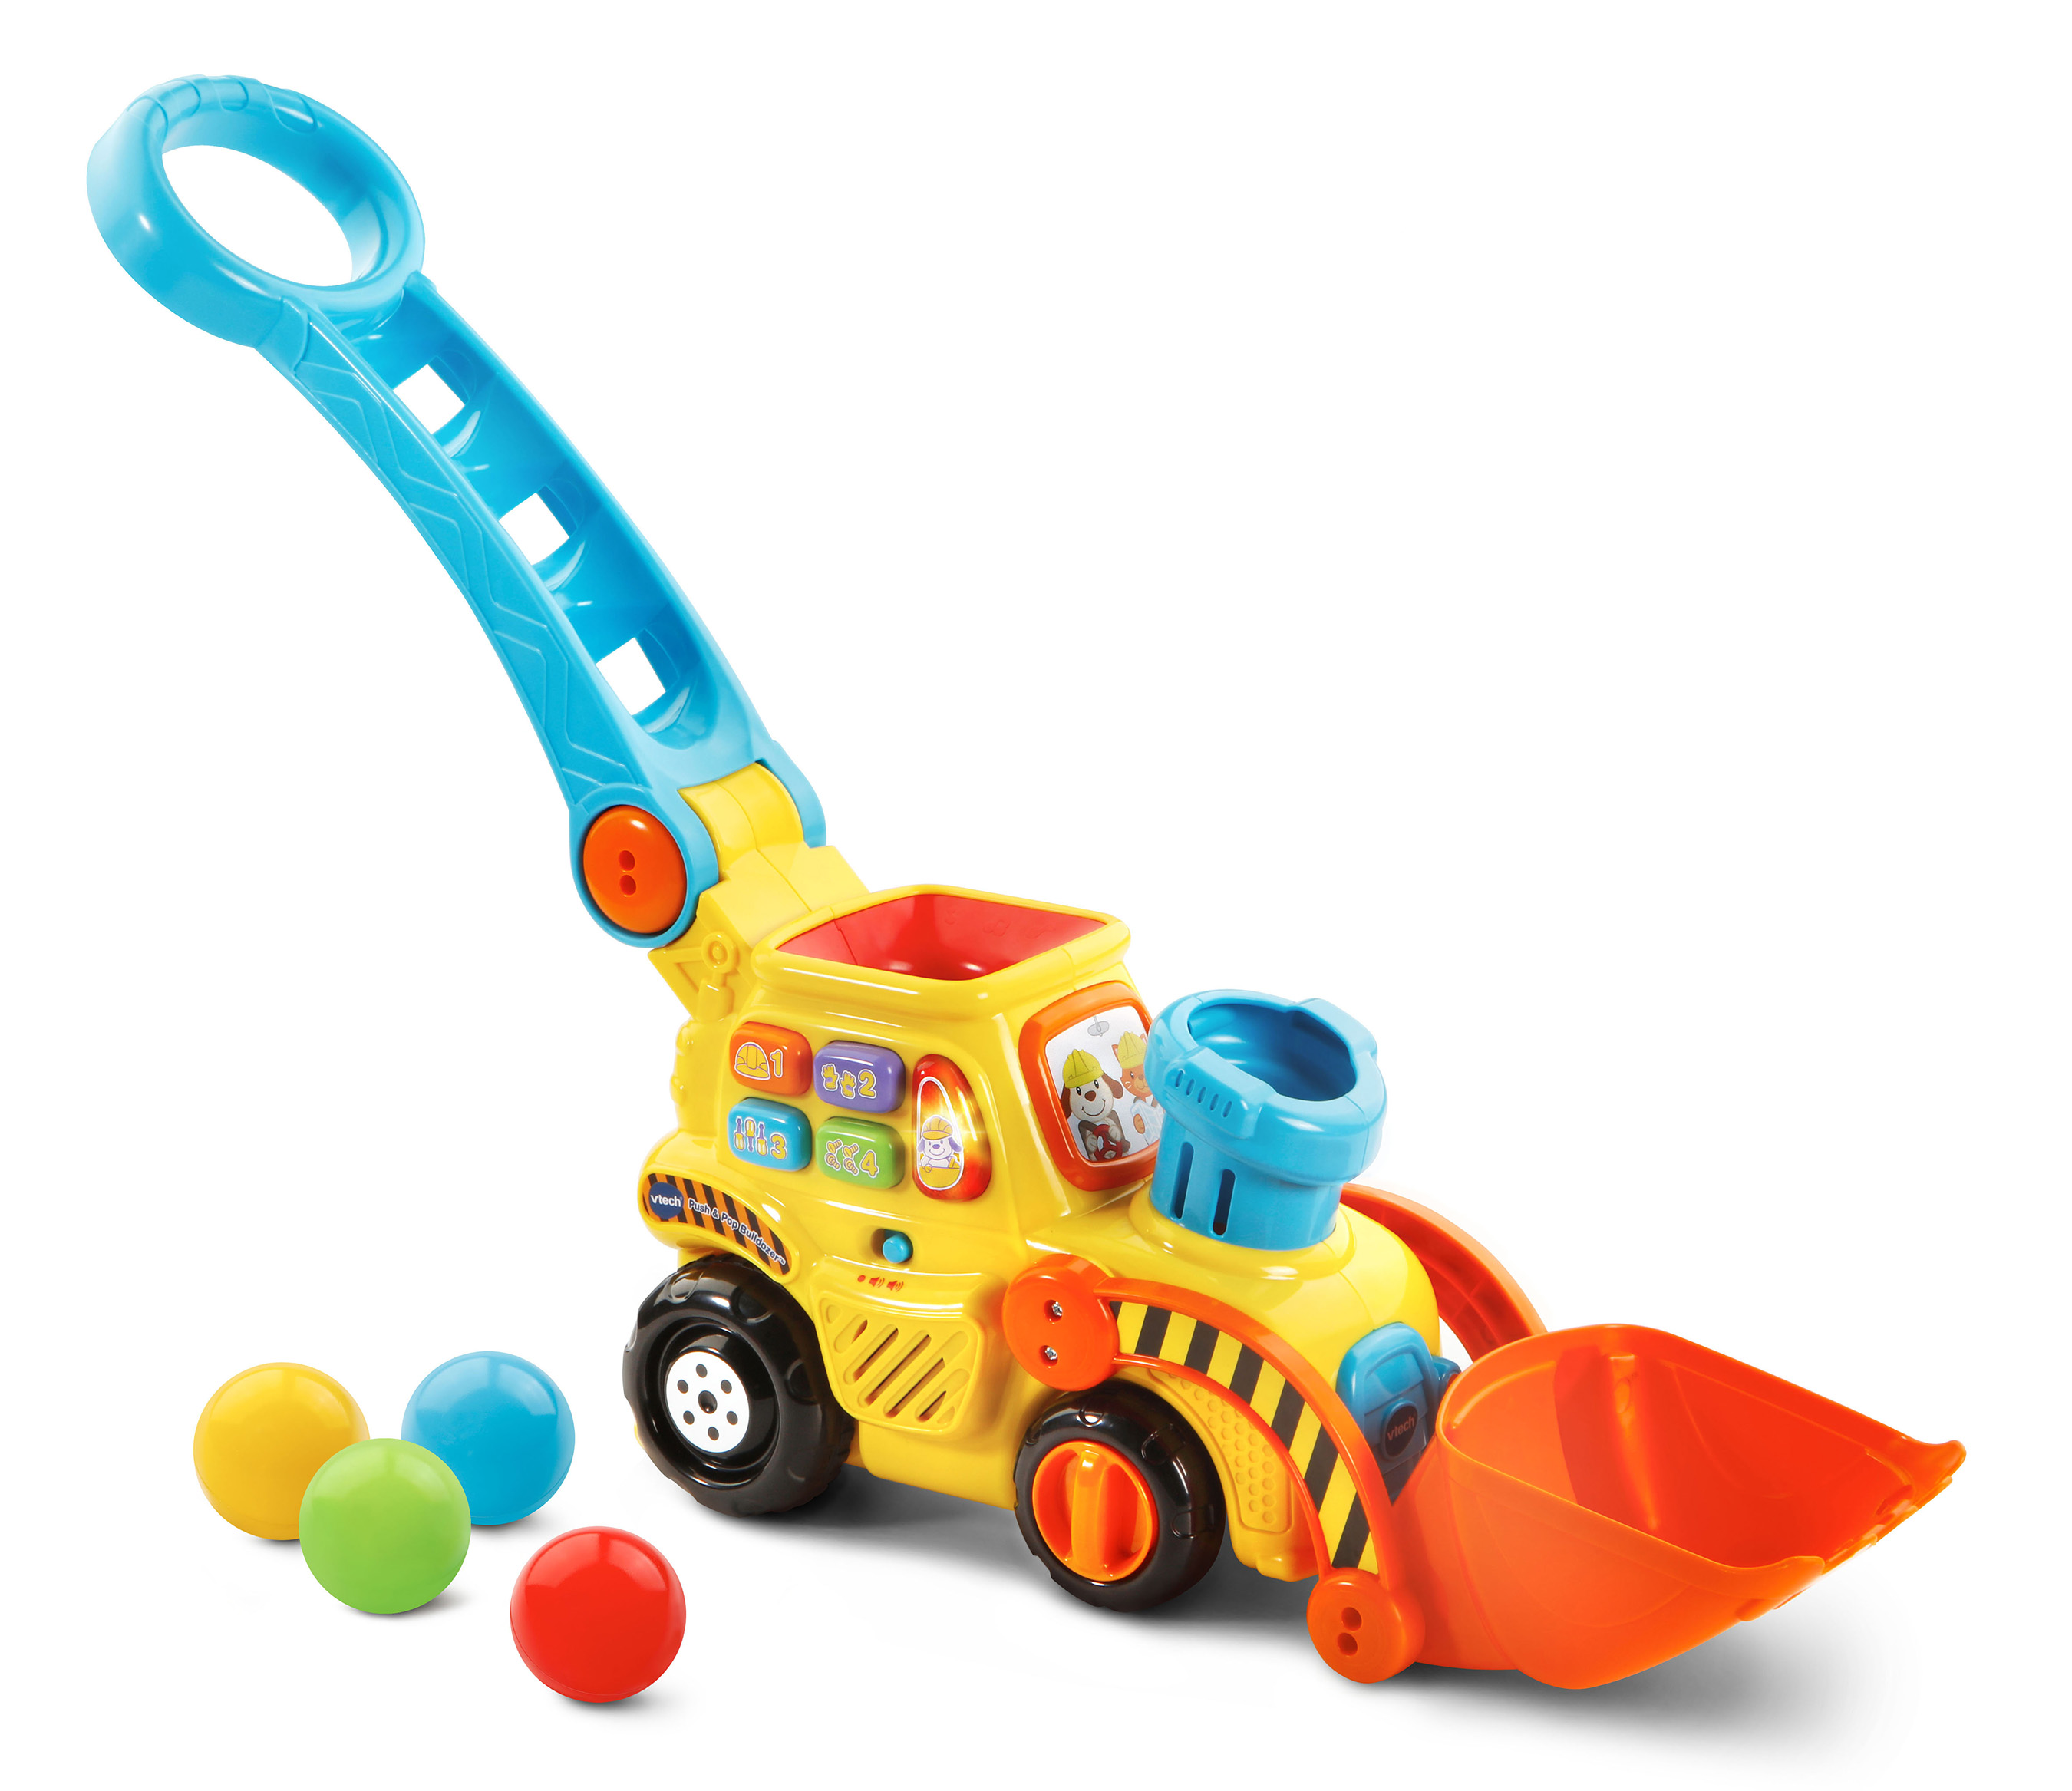 New Baby, Infant, Toddler and Preschool Collections from VTech® Available Now